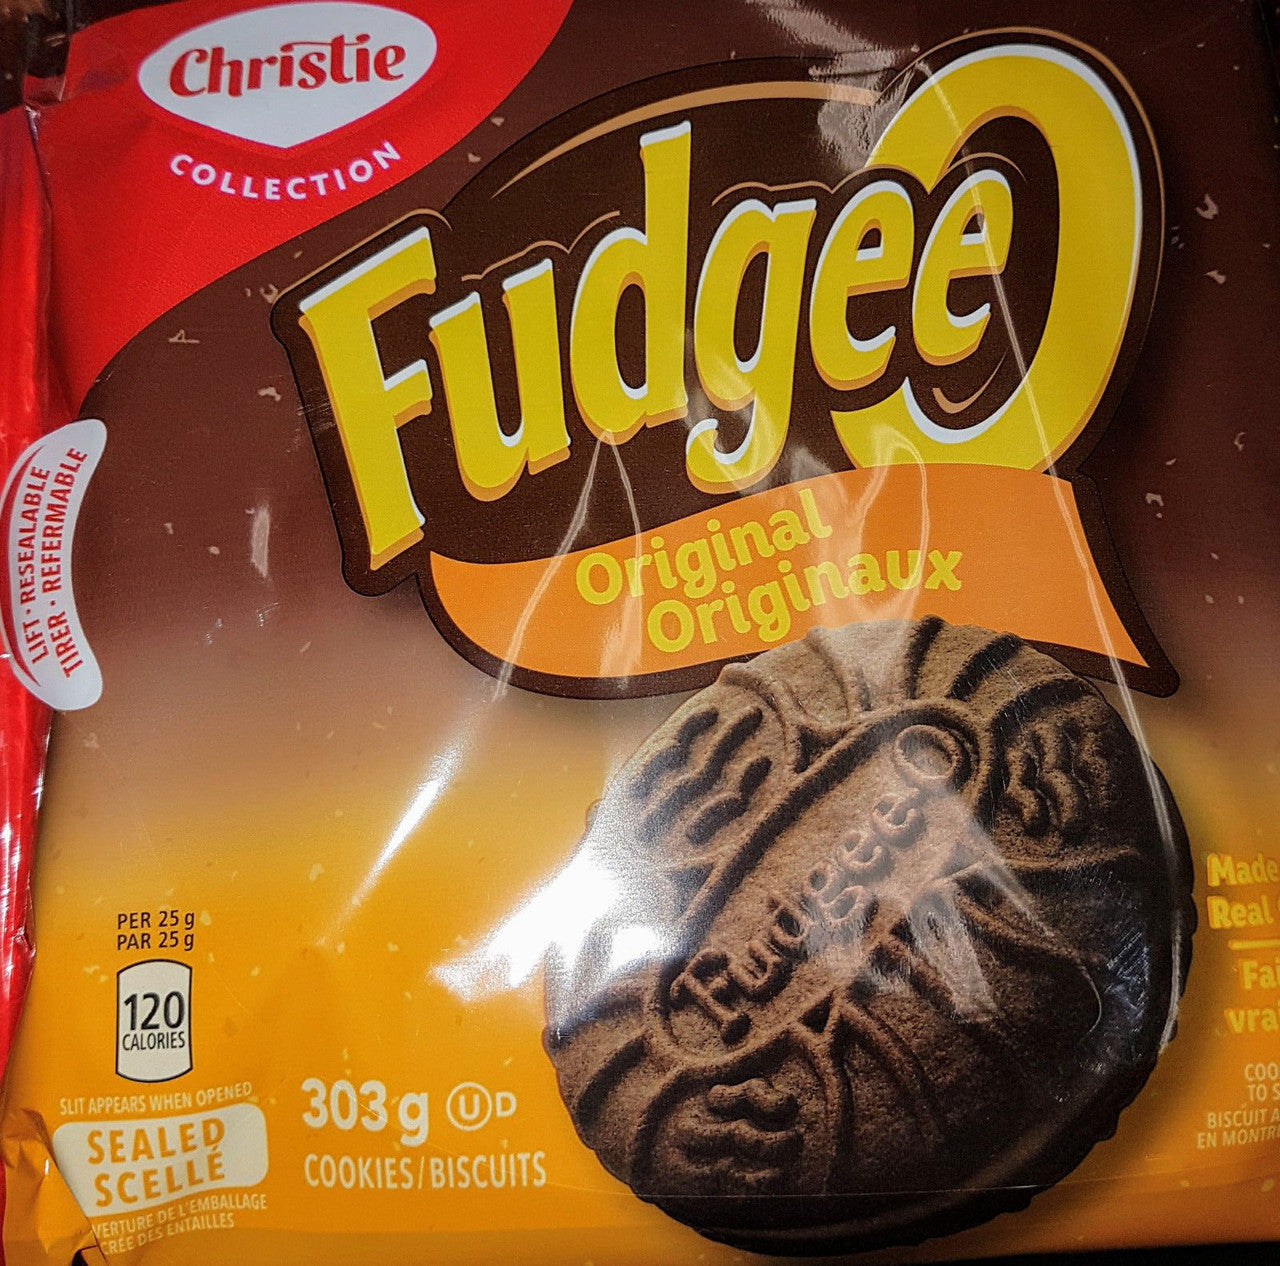 Christie Fudgeeo, Original, Cookies, 303g/10.68oz, 12 Pack, {Imported from Canada}